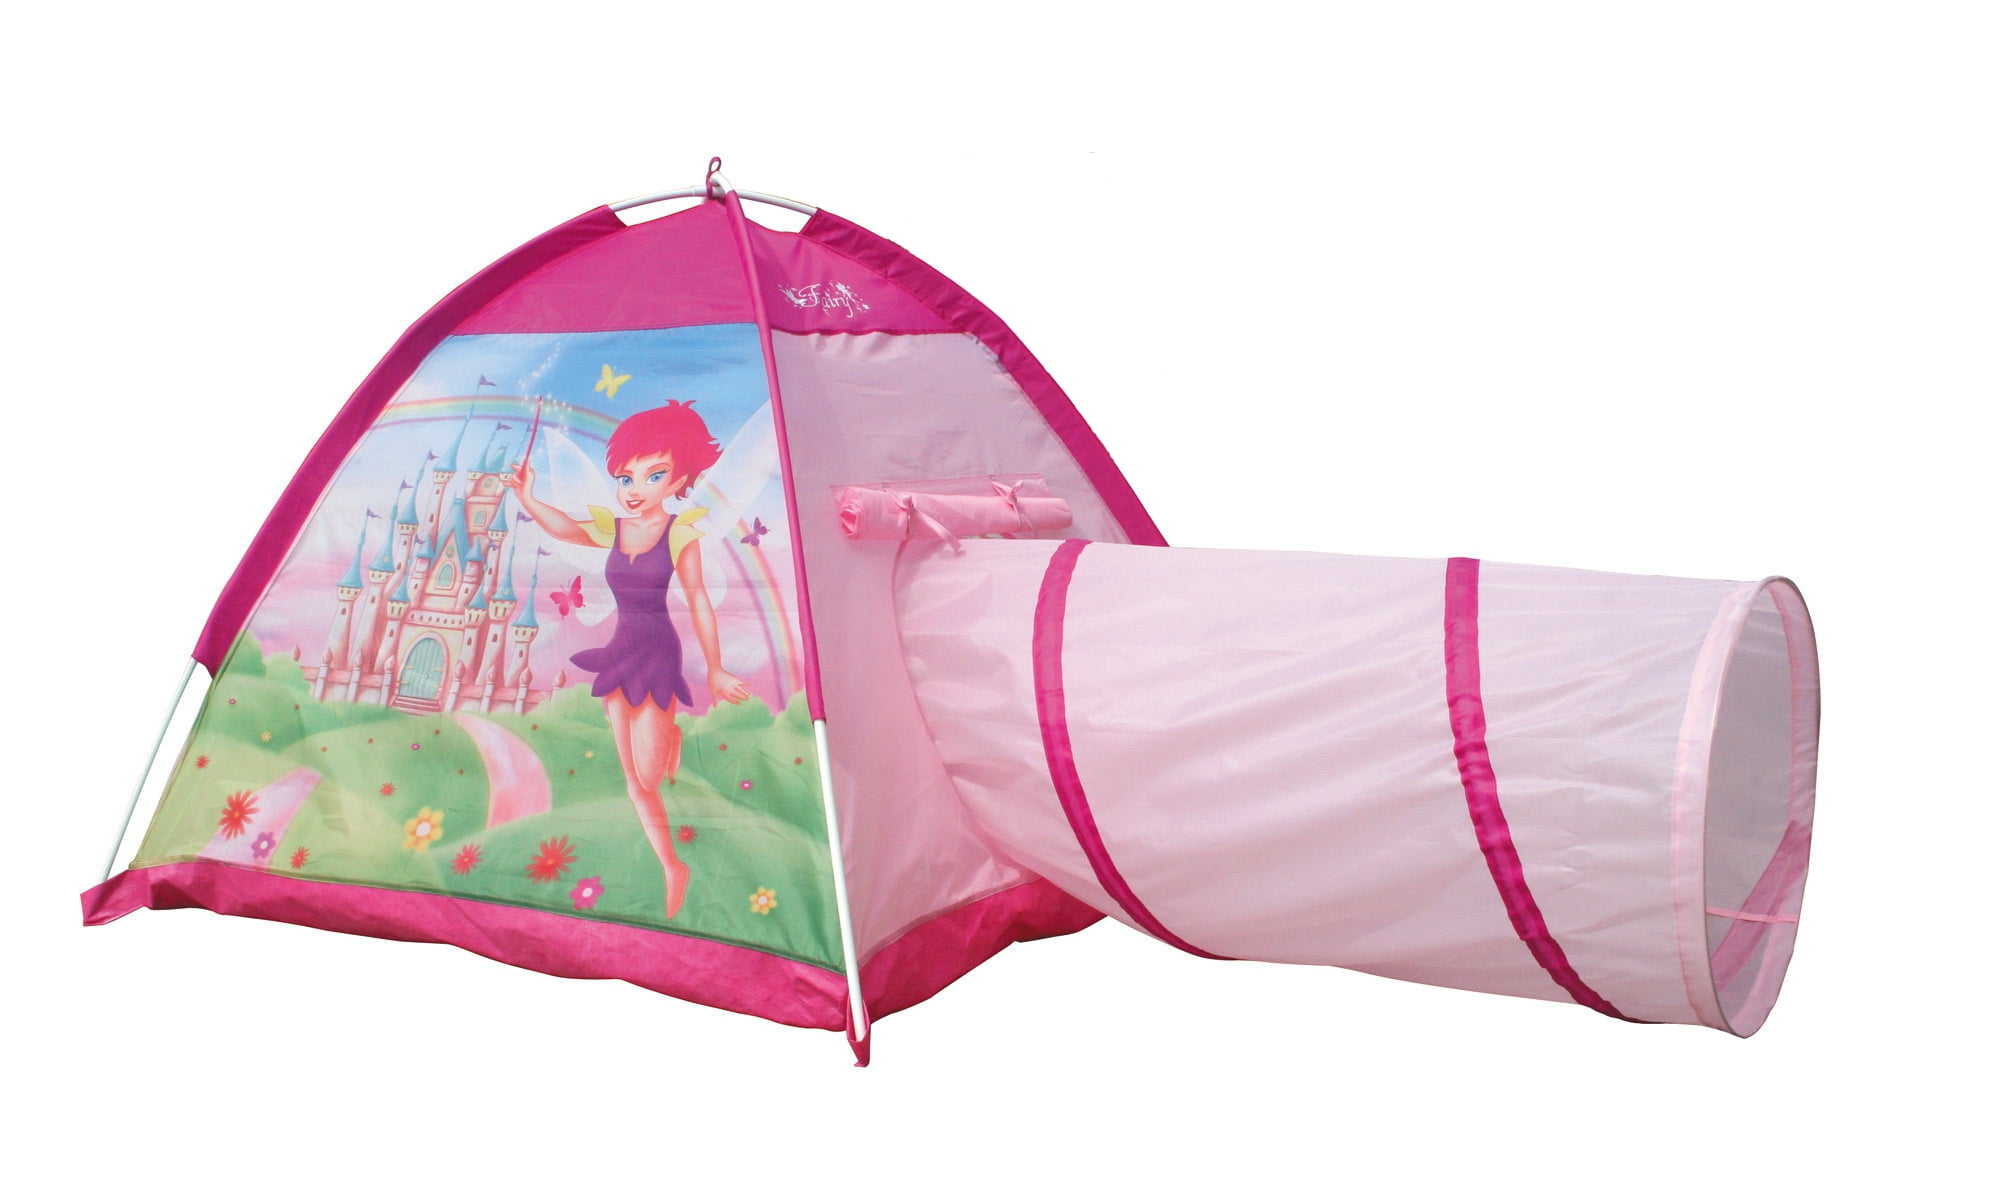 POCO DIVO Fairy Tunnel Dome Tent 2pc Princess Castle Girls Pink Play House